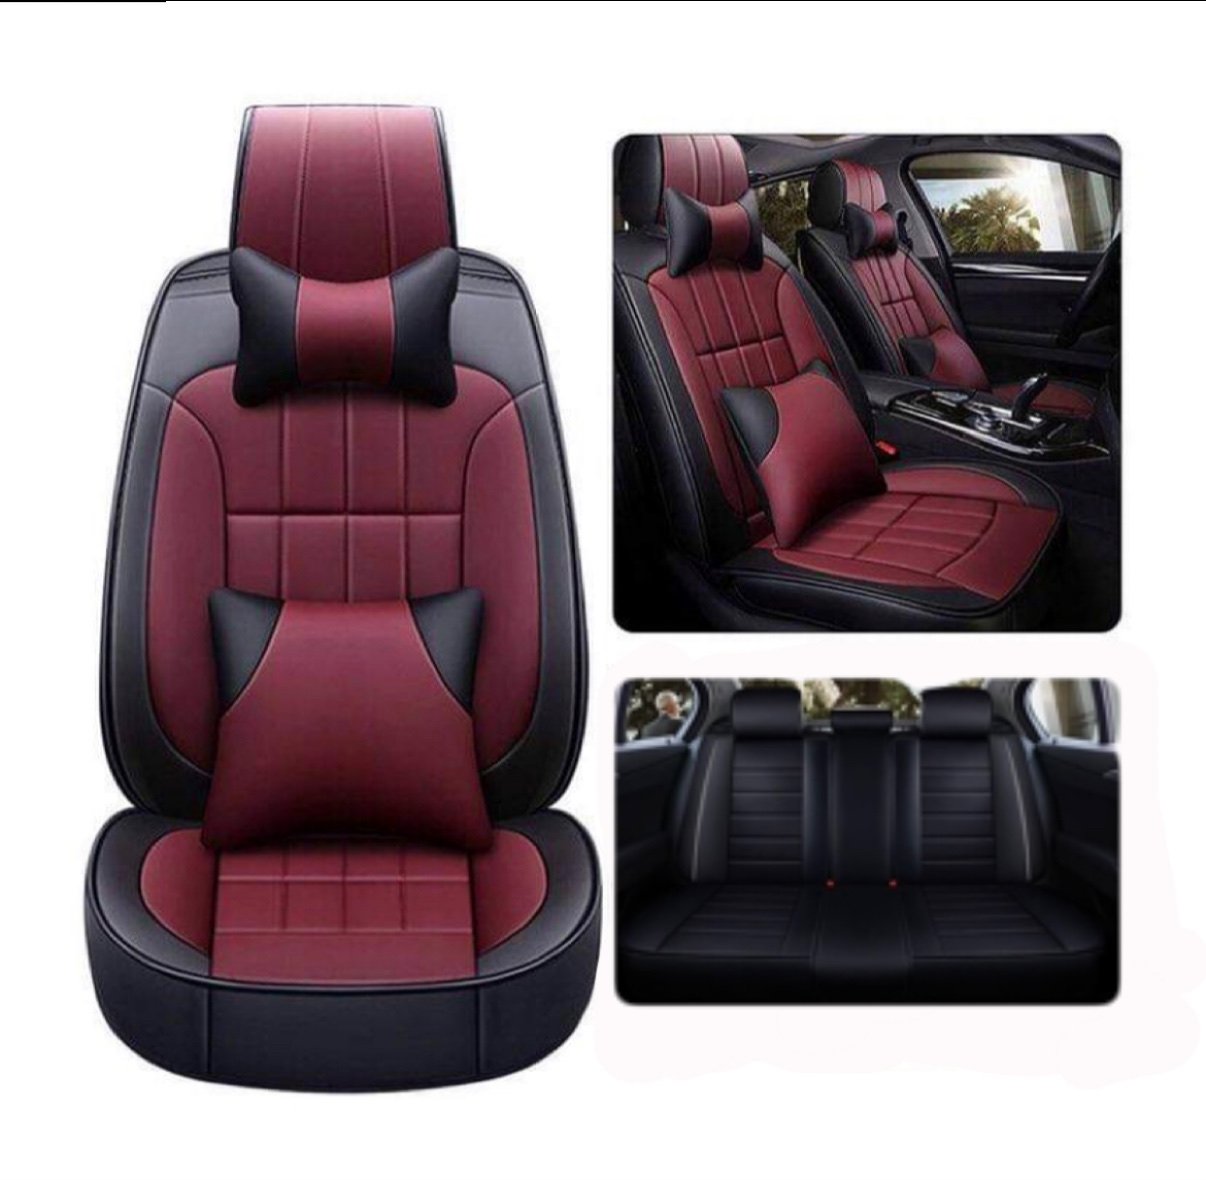 auto seat covers for car truck suv van universal protectors faux leather Ip0794wXV